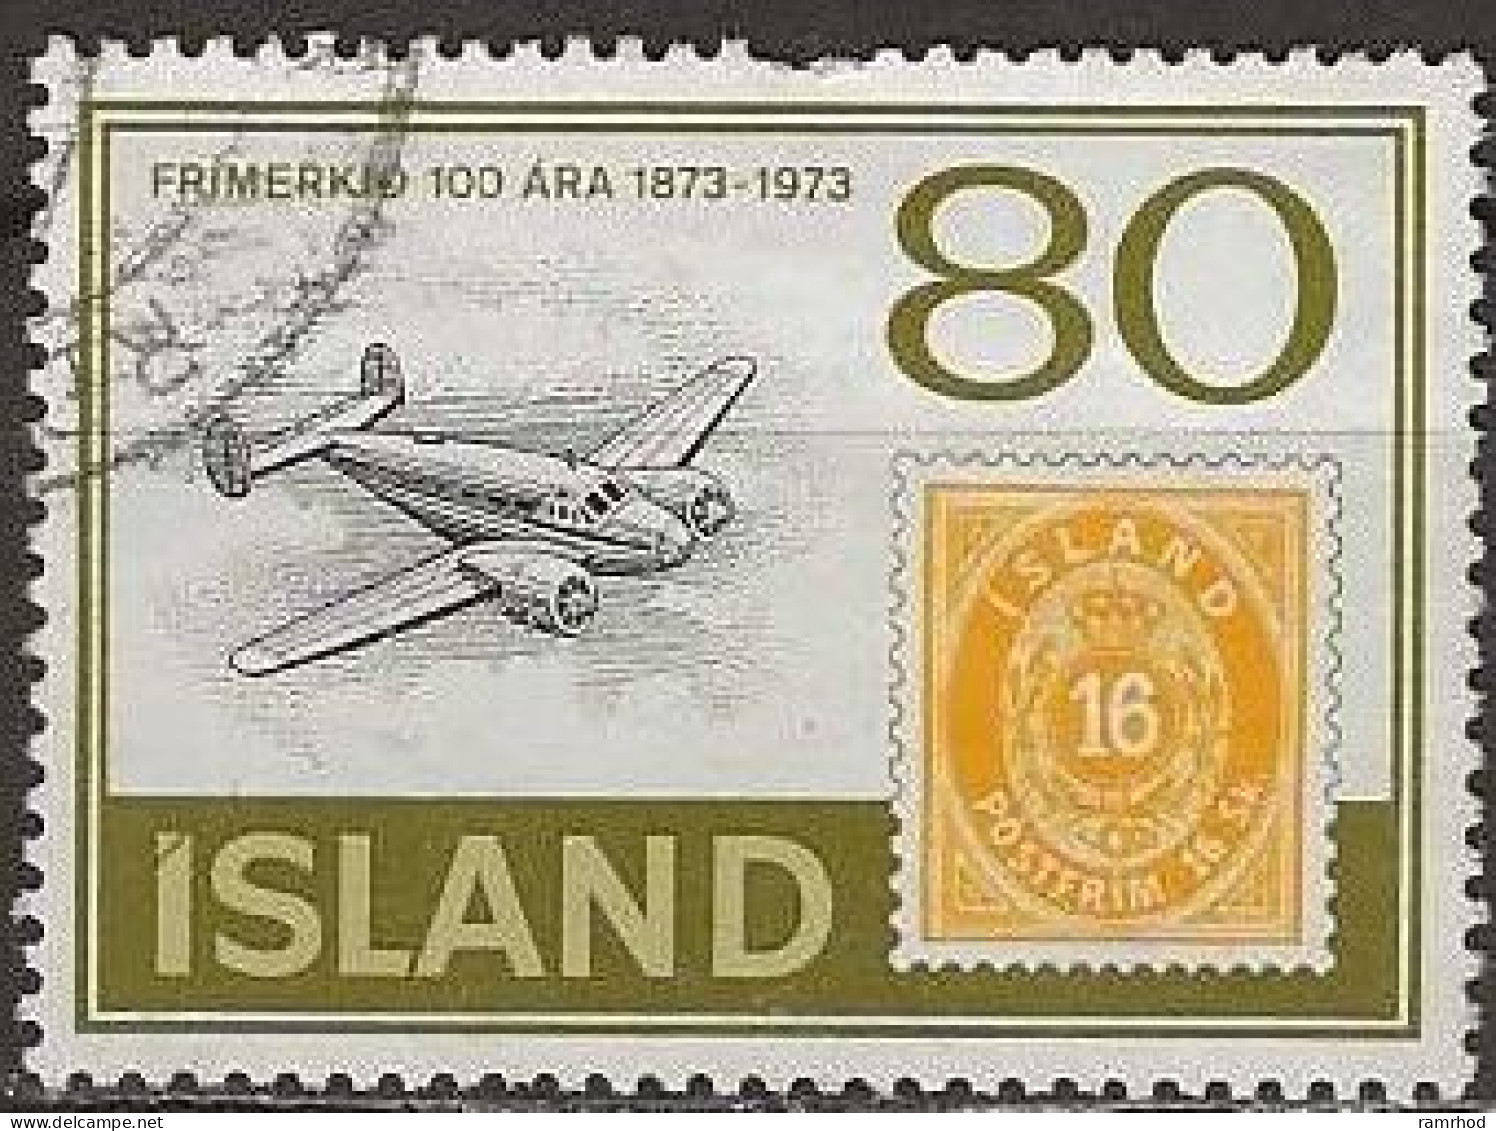 ICELAND 1973 Stamp Centenary - 80k. - Beech Model 18 Mail Plane FU - Used Stamps